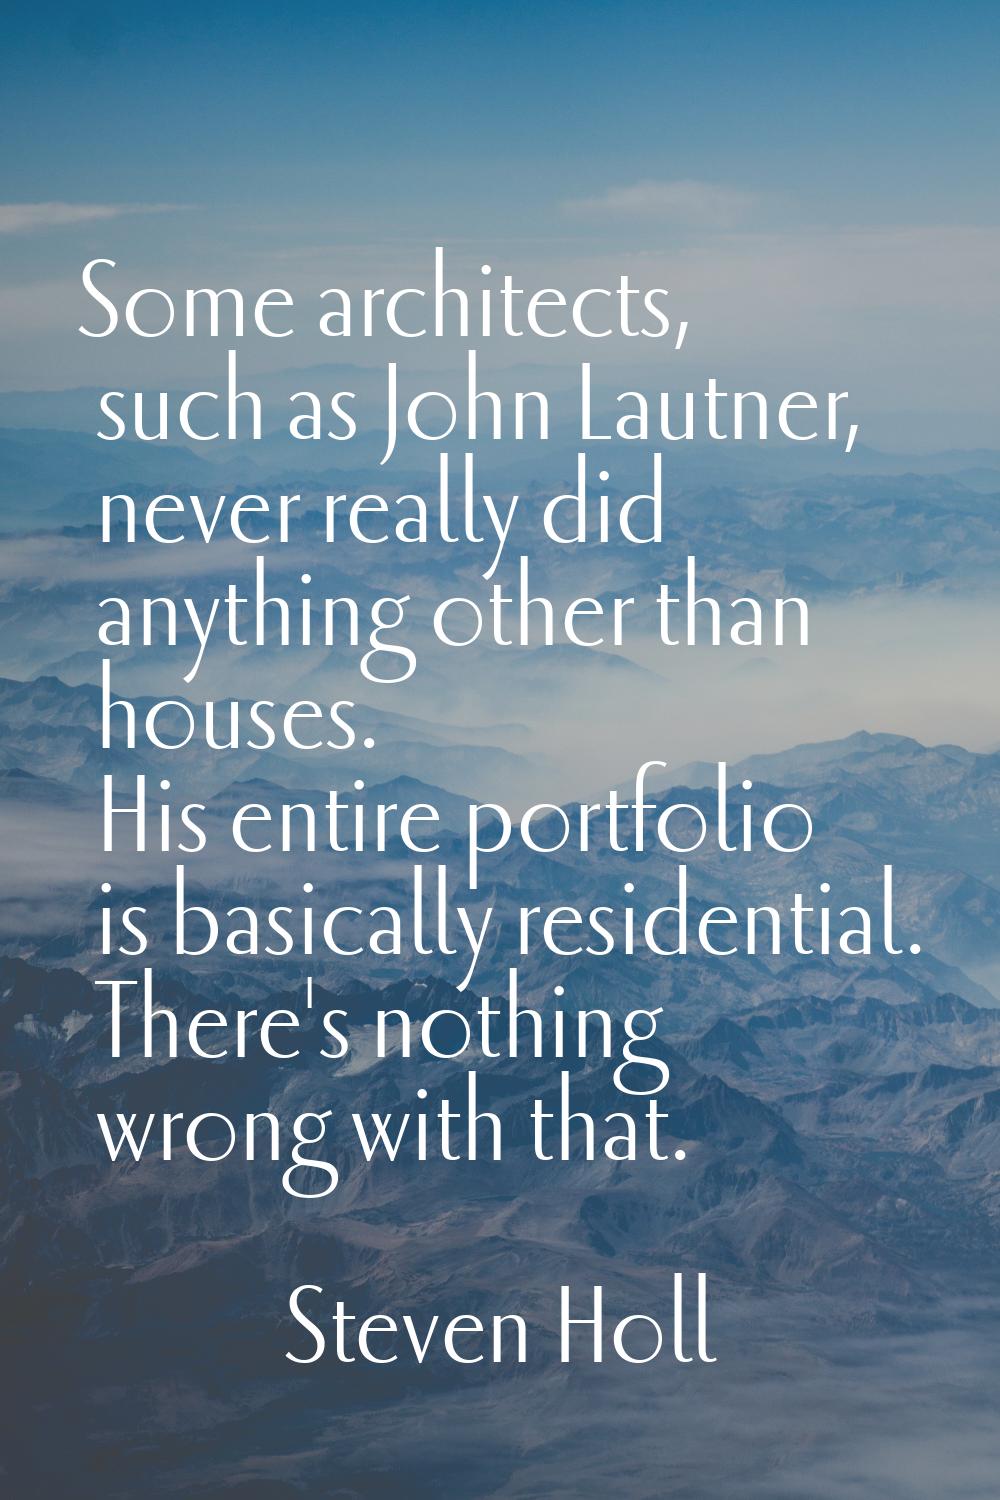 Some architects, such as John Lautner, never really did anything other than houses. His entire port